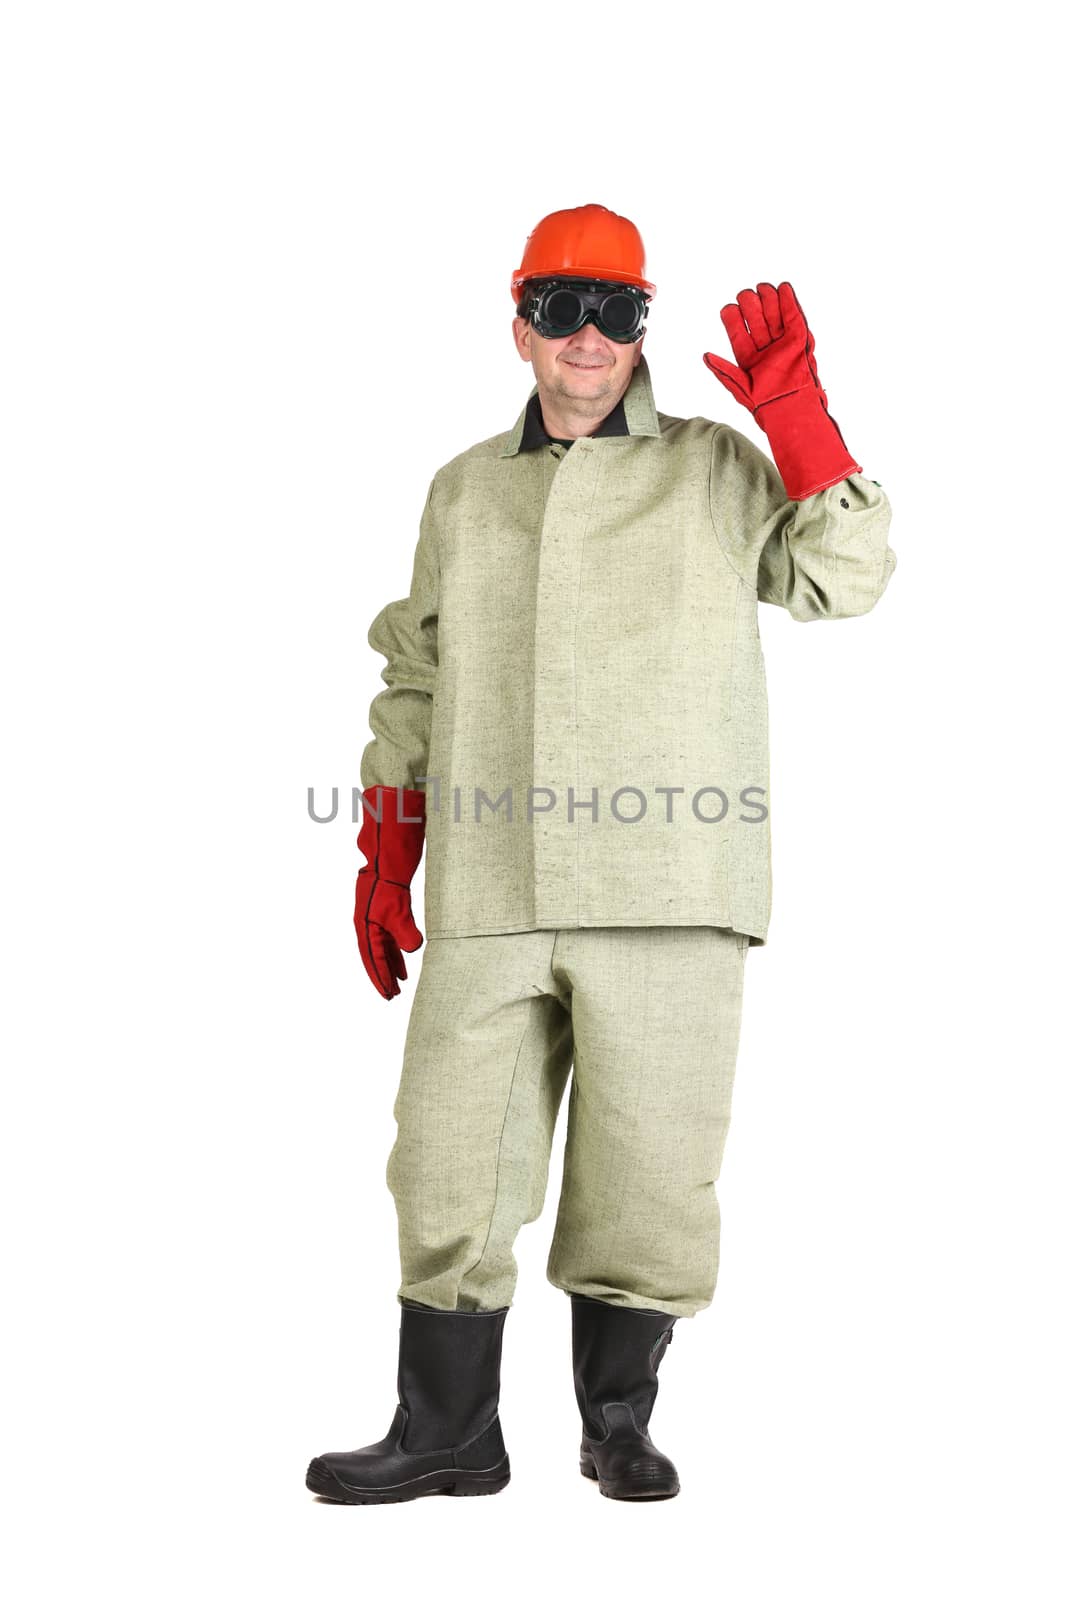 Welder in hard hat with hand up. Isolated on a white background.